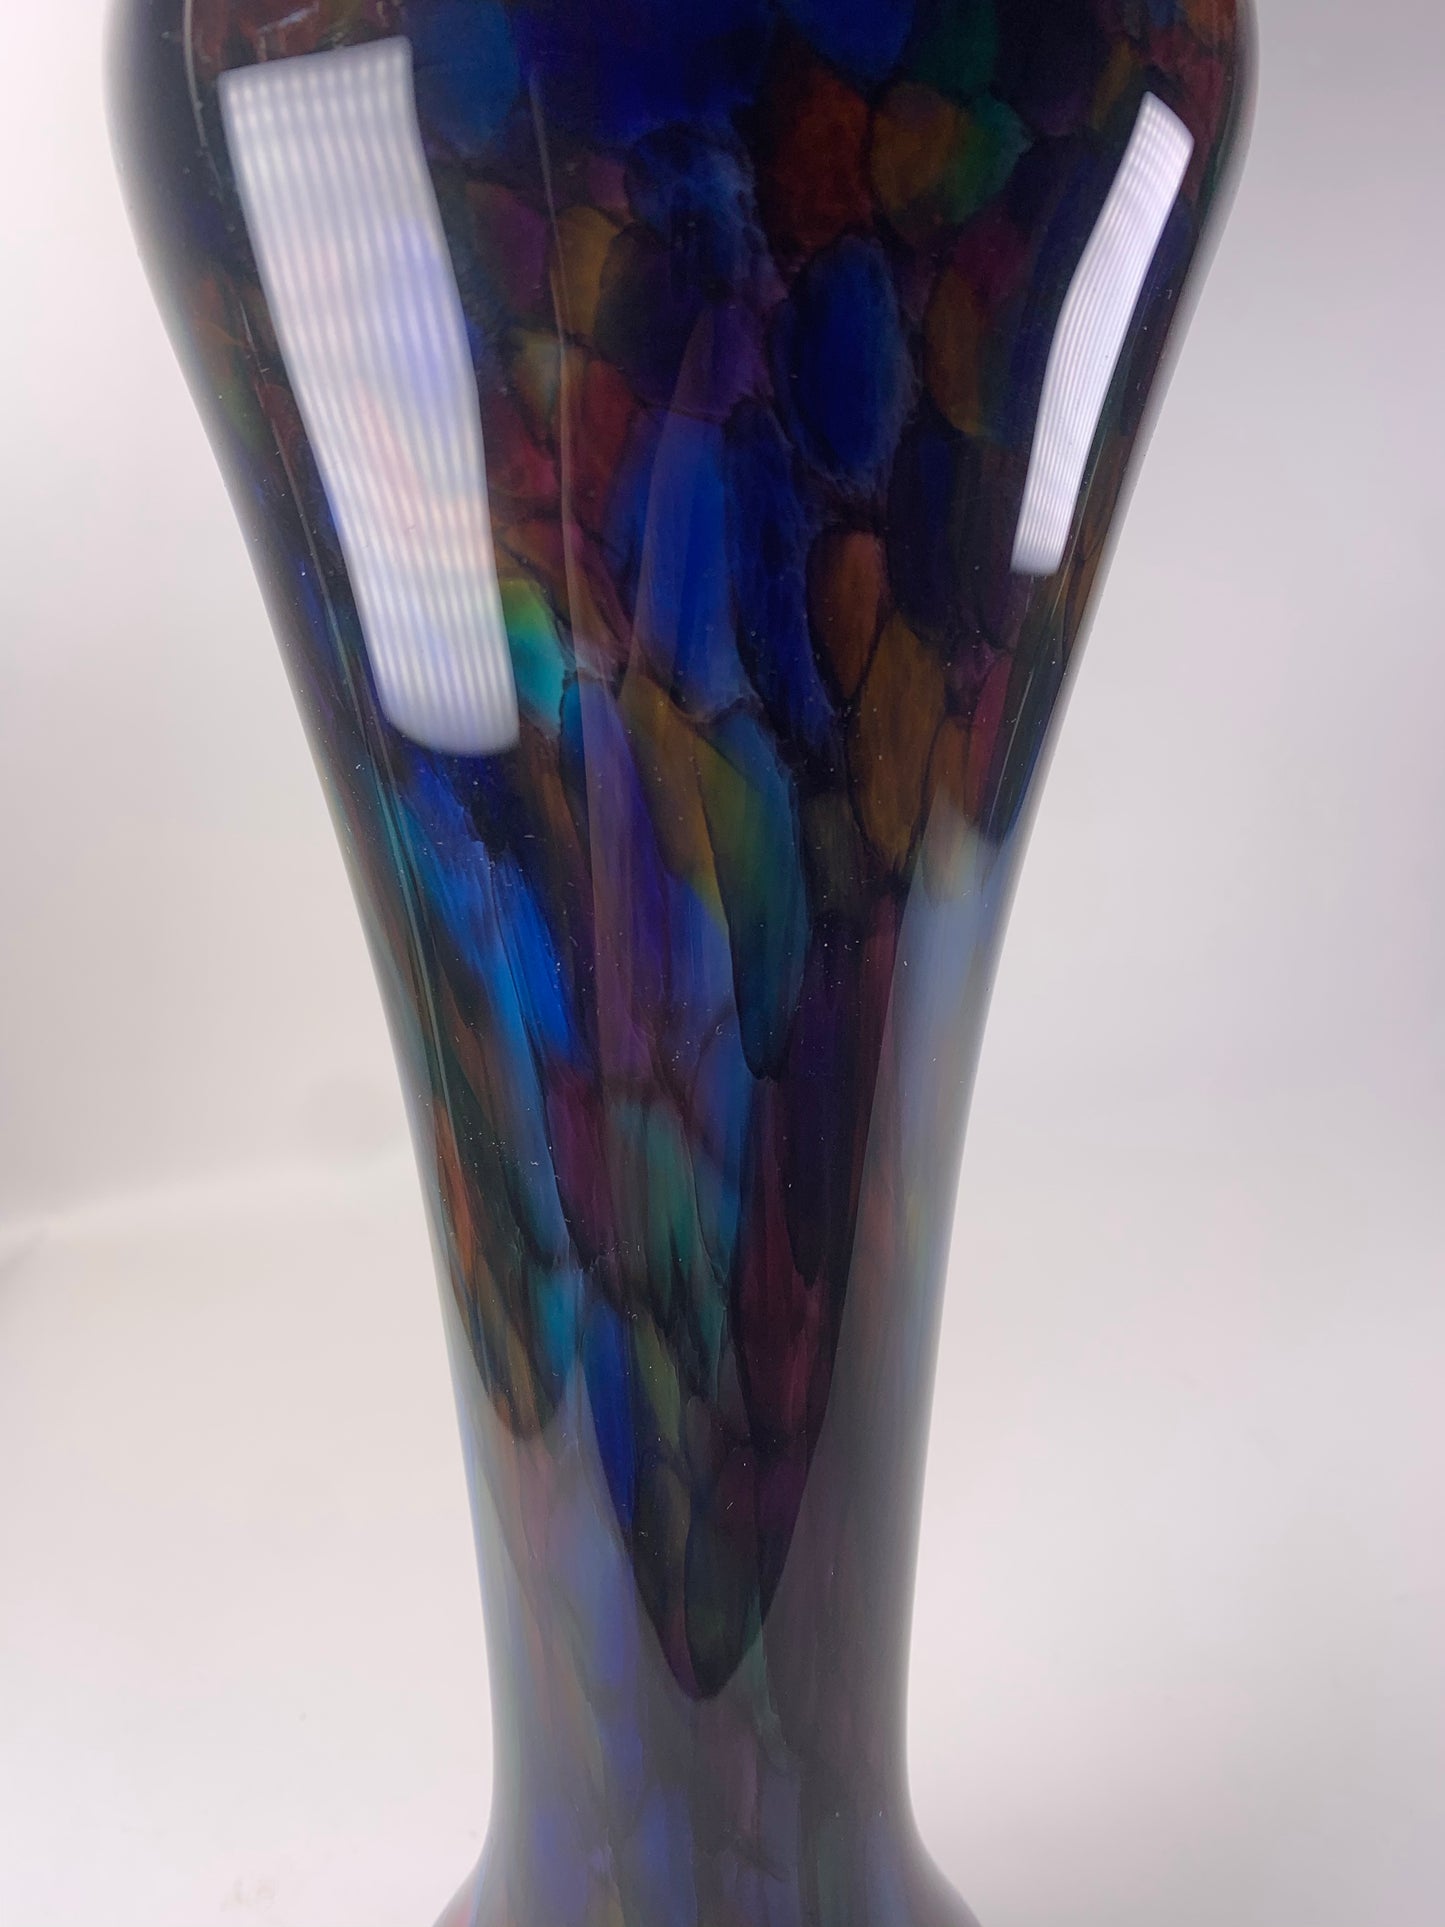 The Glass Forge 2000 multi Colored 11” Hand Blown Glass Vase